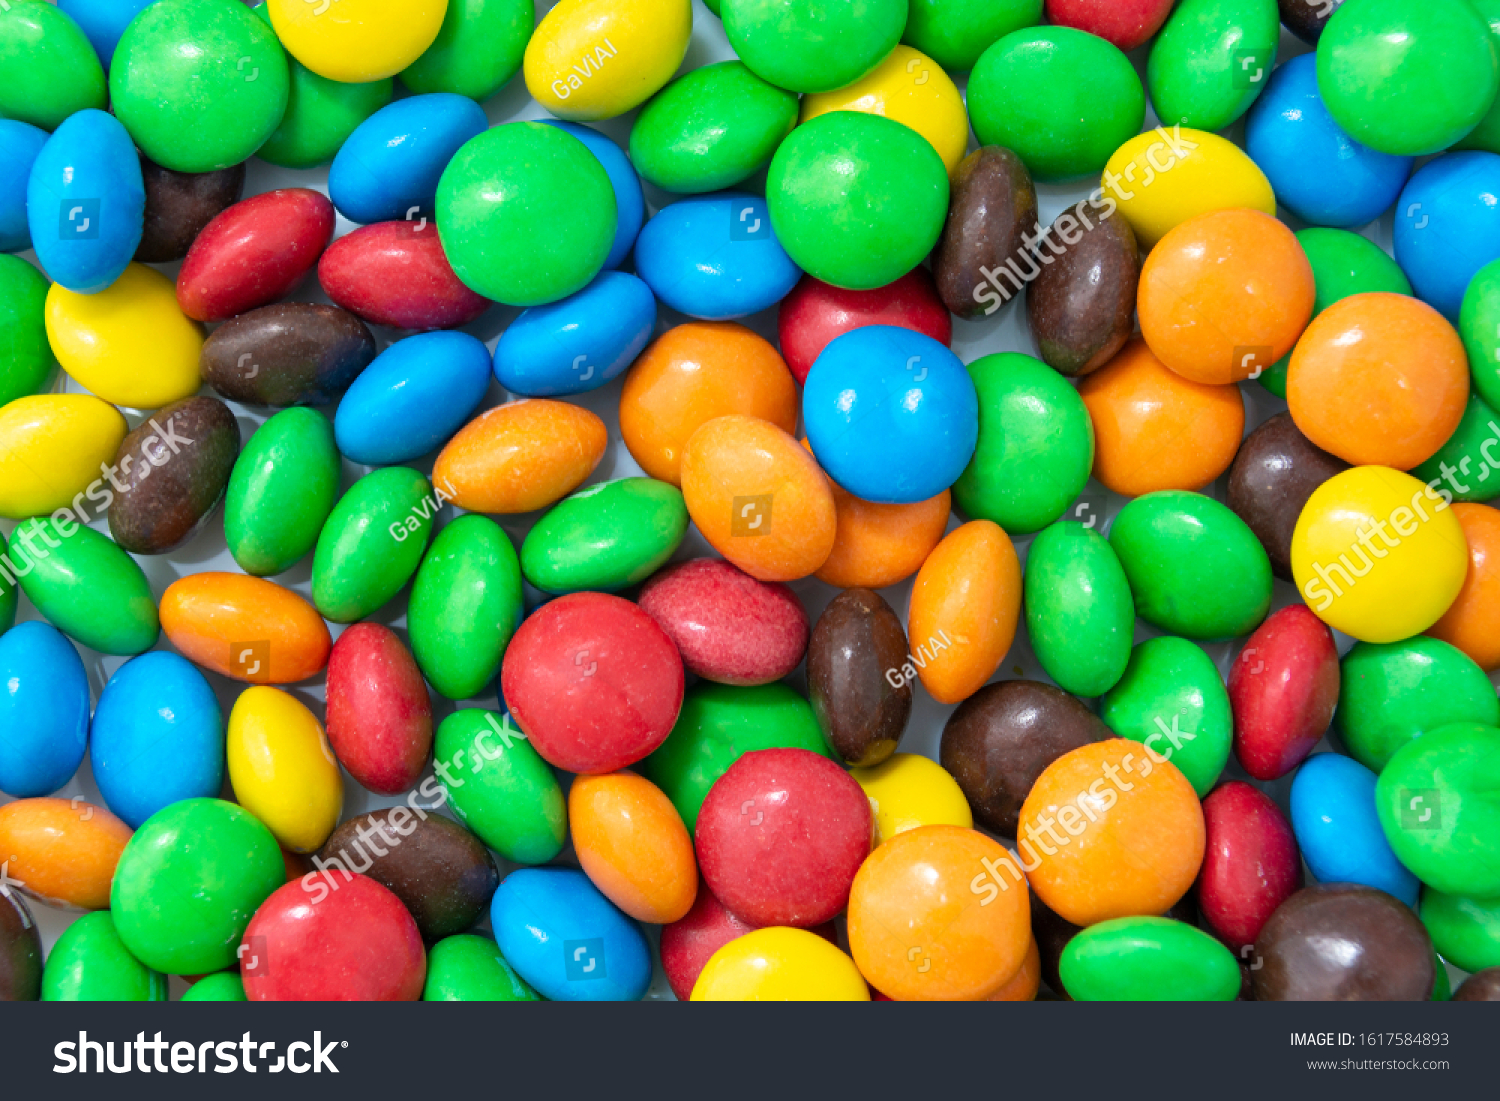 Multi-colored sweet candies (confectionery) of different colors. Colorful abstract background. #1617584893